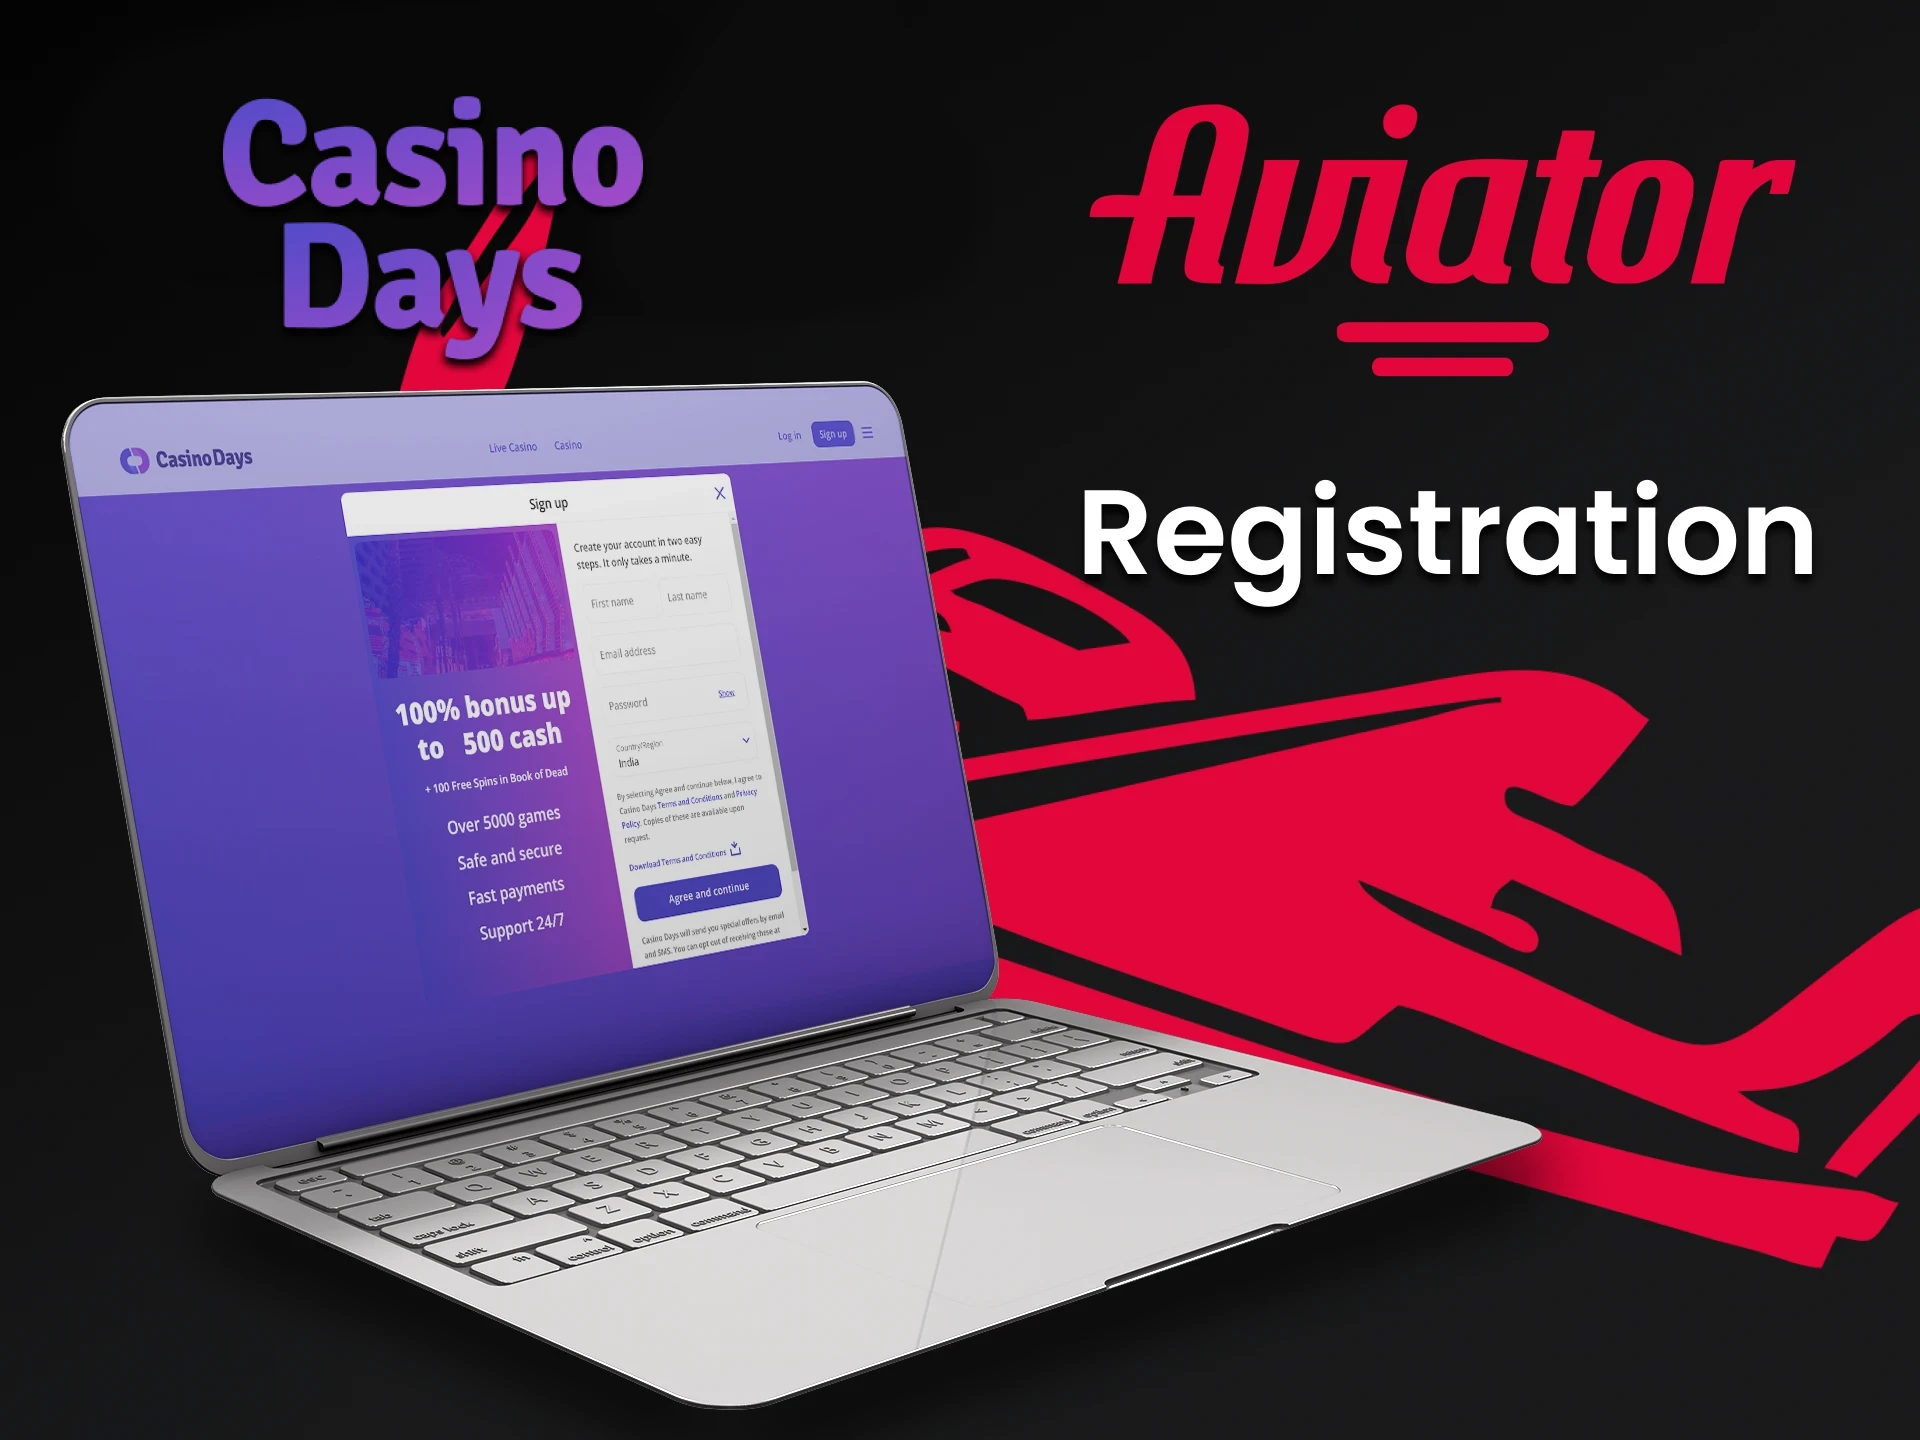 Create an account at Casino Days to play Aviator.